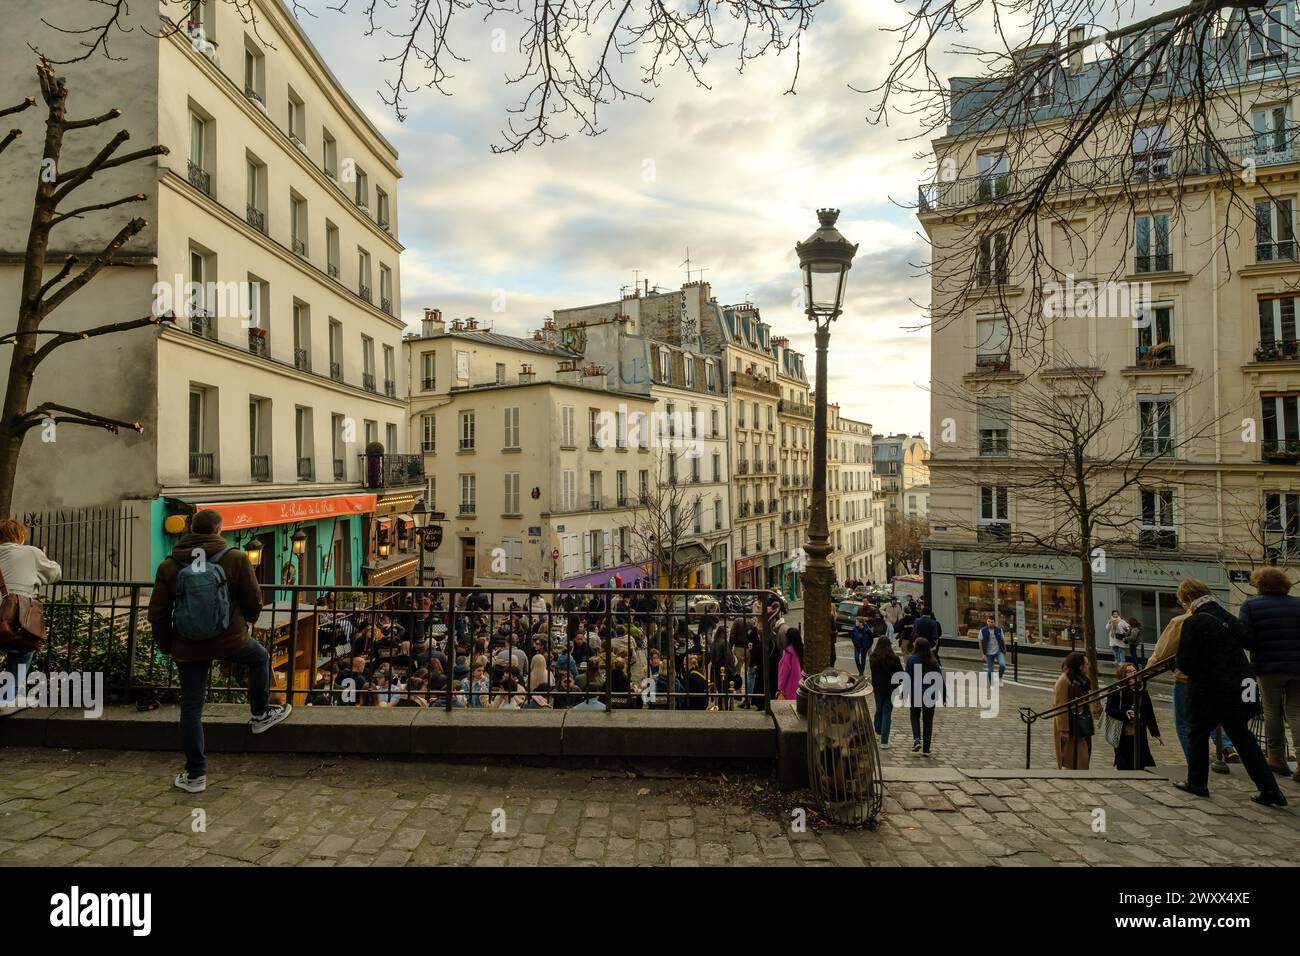 Paris, France - February 17, 2024 : View of people sitting outdoors and enjoying dinner and drinks at a cafe restaurant bistro in Paris France Stock Photo